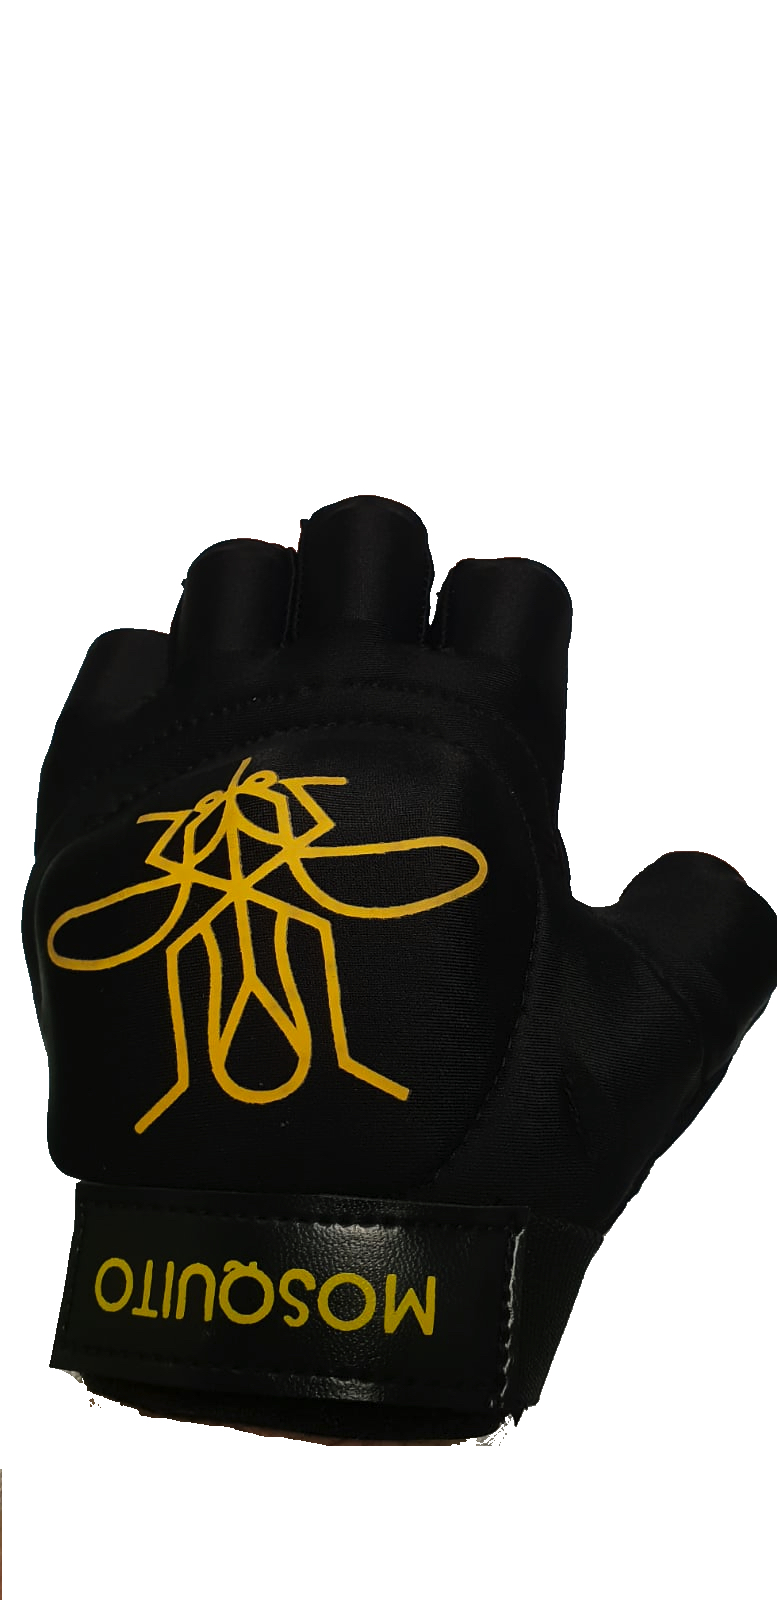 Mosquito Black Open Palm Glove - The Hockey People